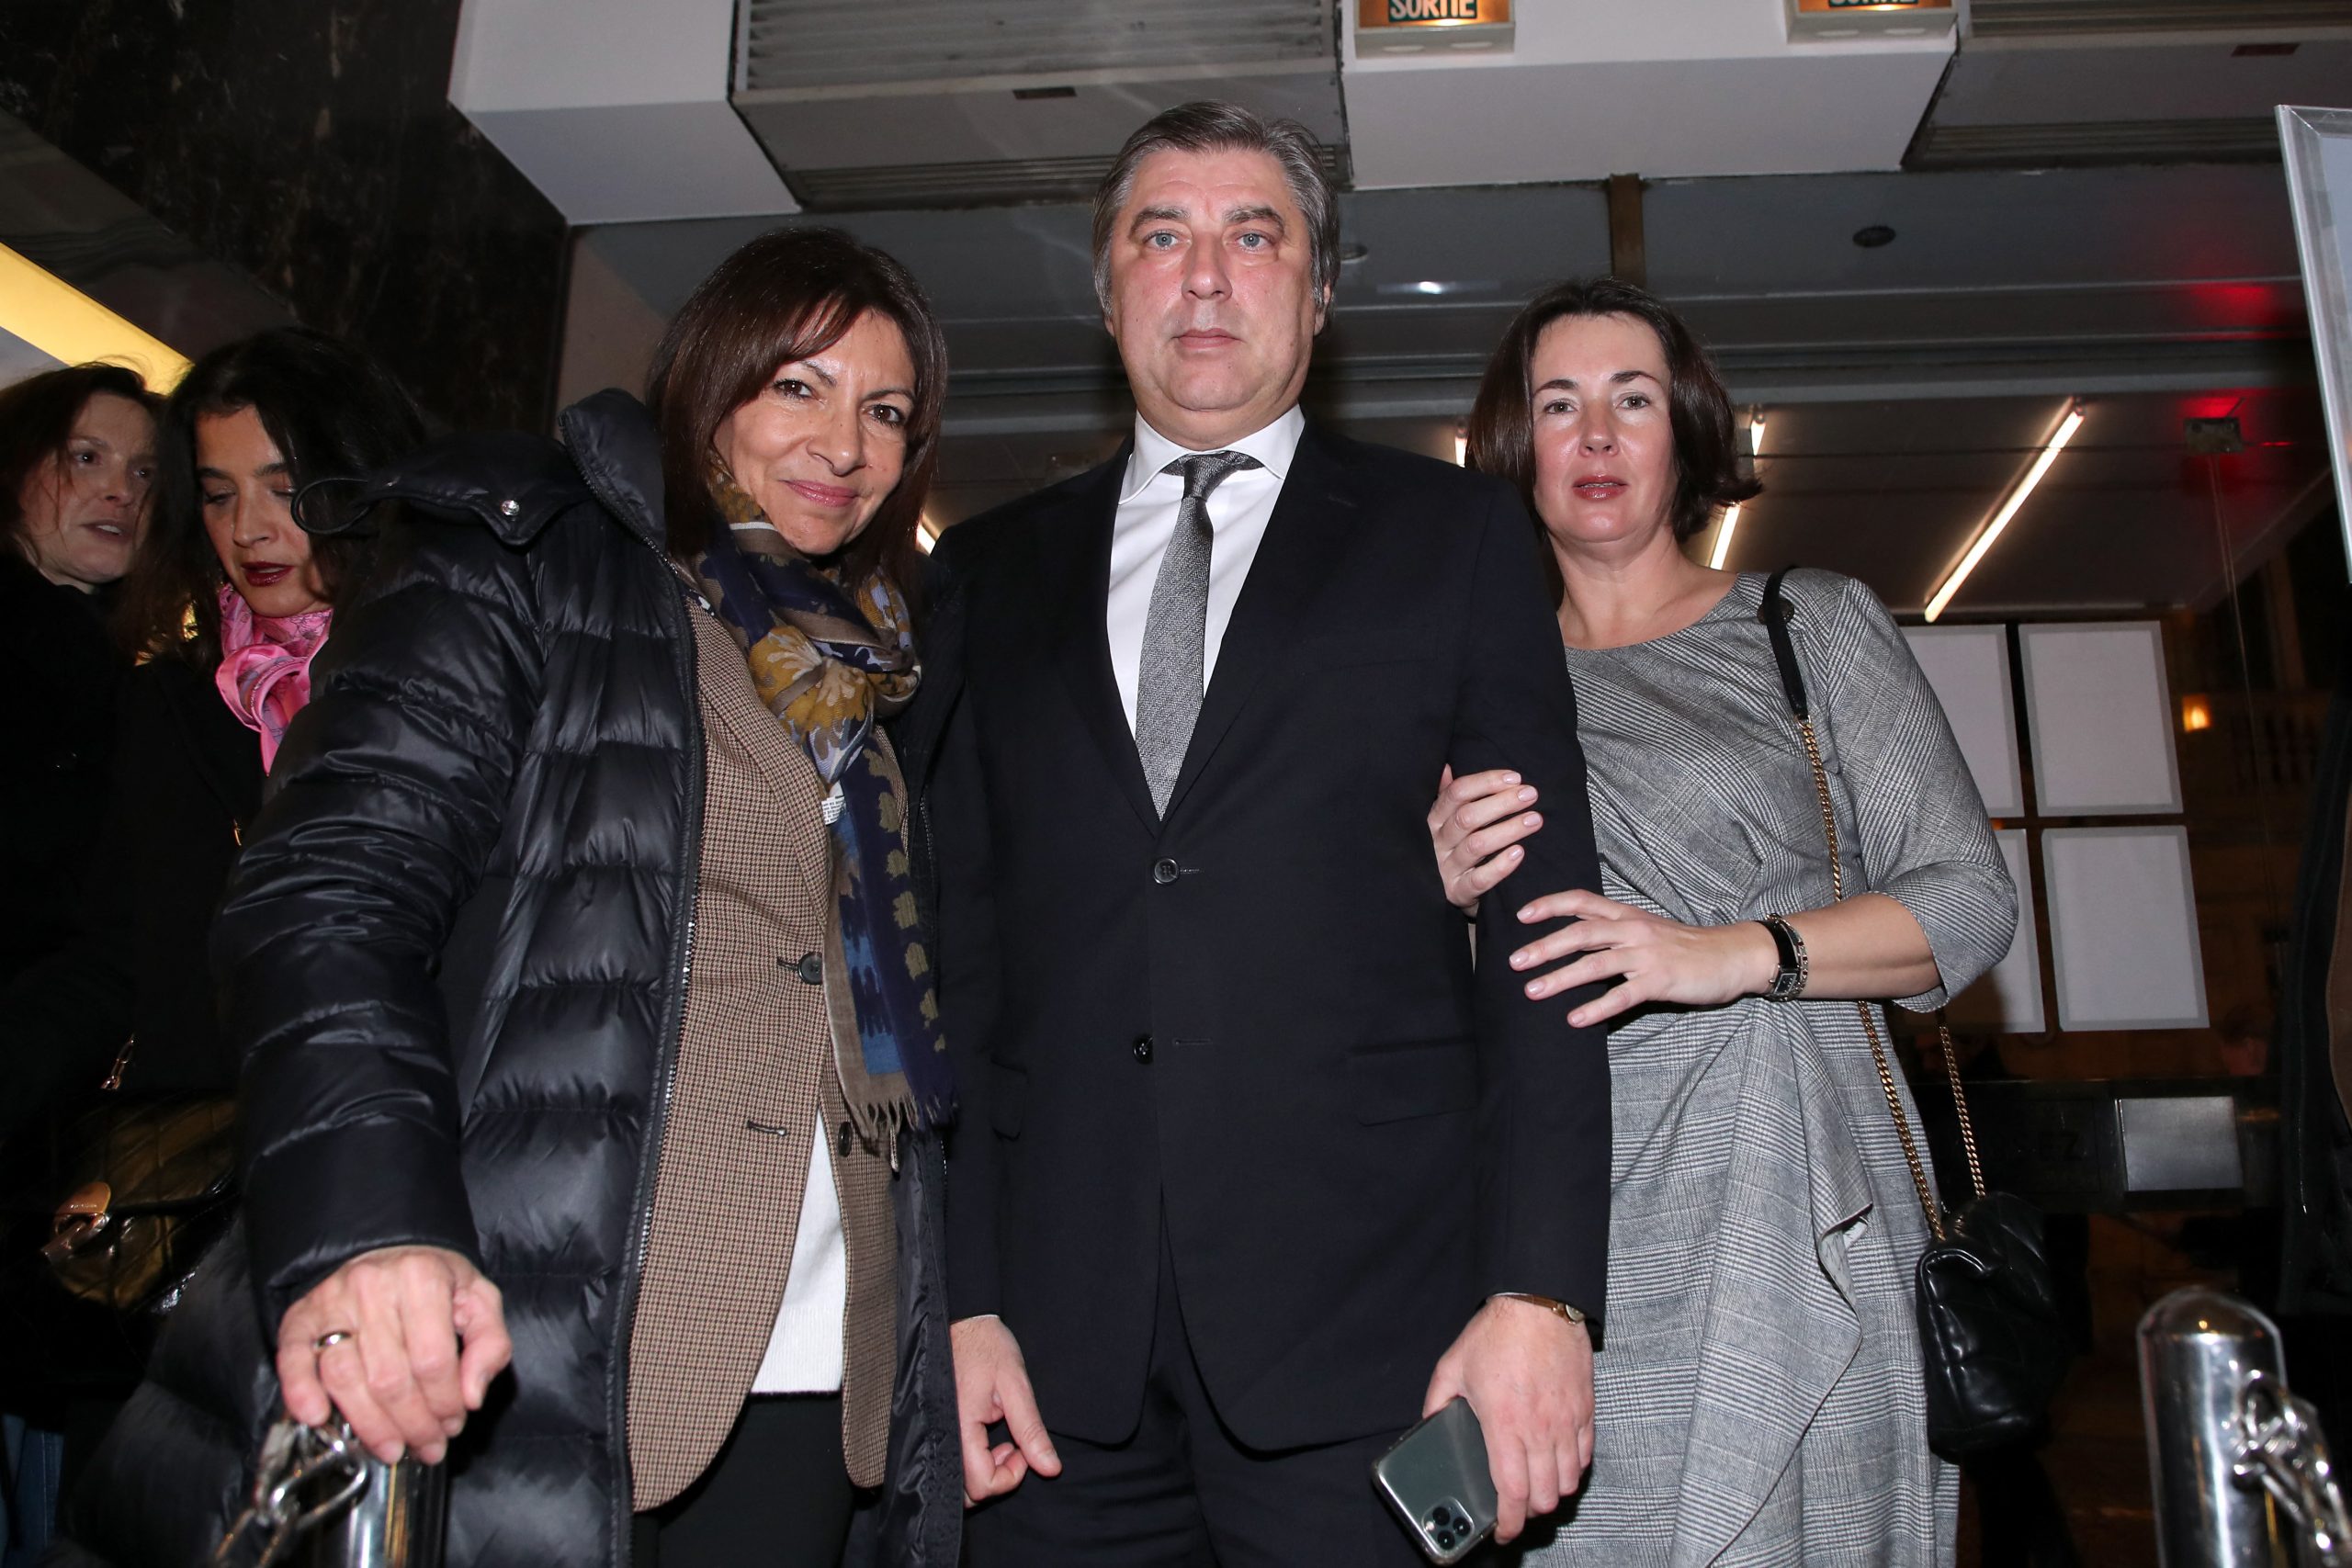 Anne Hidalgo, Ukrainian Ambassador to France Vadym Omelchenko and his wife with Anne Hidalgo at the premiere of BHL's film "Slava Ukraini" on 6 February 2023 at the Balzac. Photo: Bertrand Rindoff/Best Images